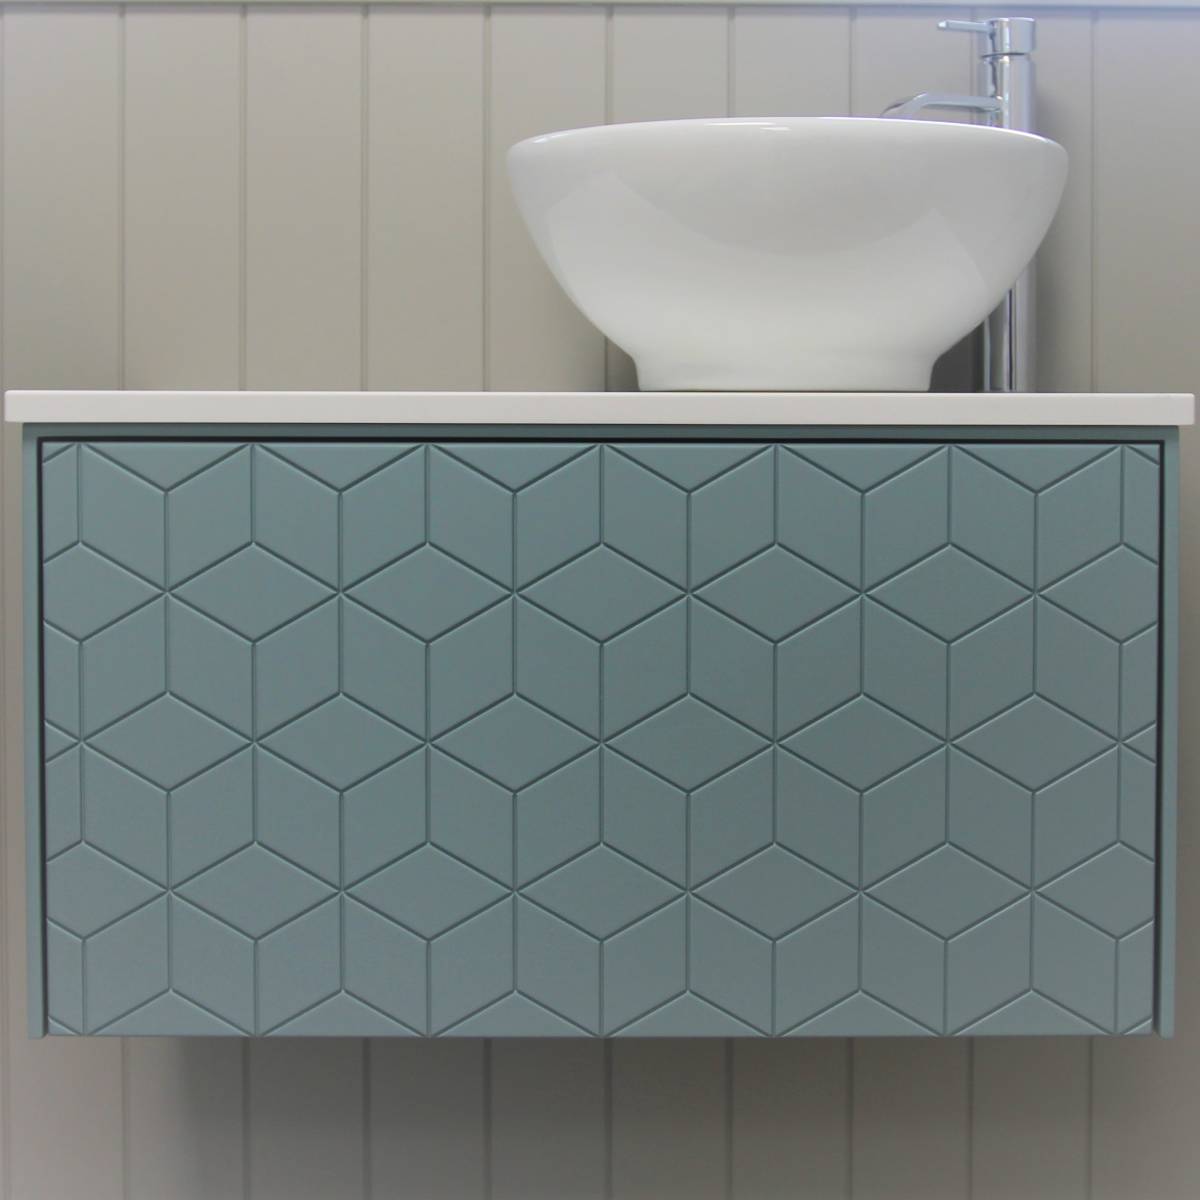 Josef Martin Vario 750mm Wall Mounted Vanity Unit with Prism Front & Pebble Worktop - Oval Room Blue (11386)